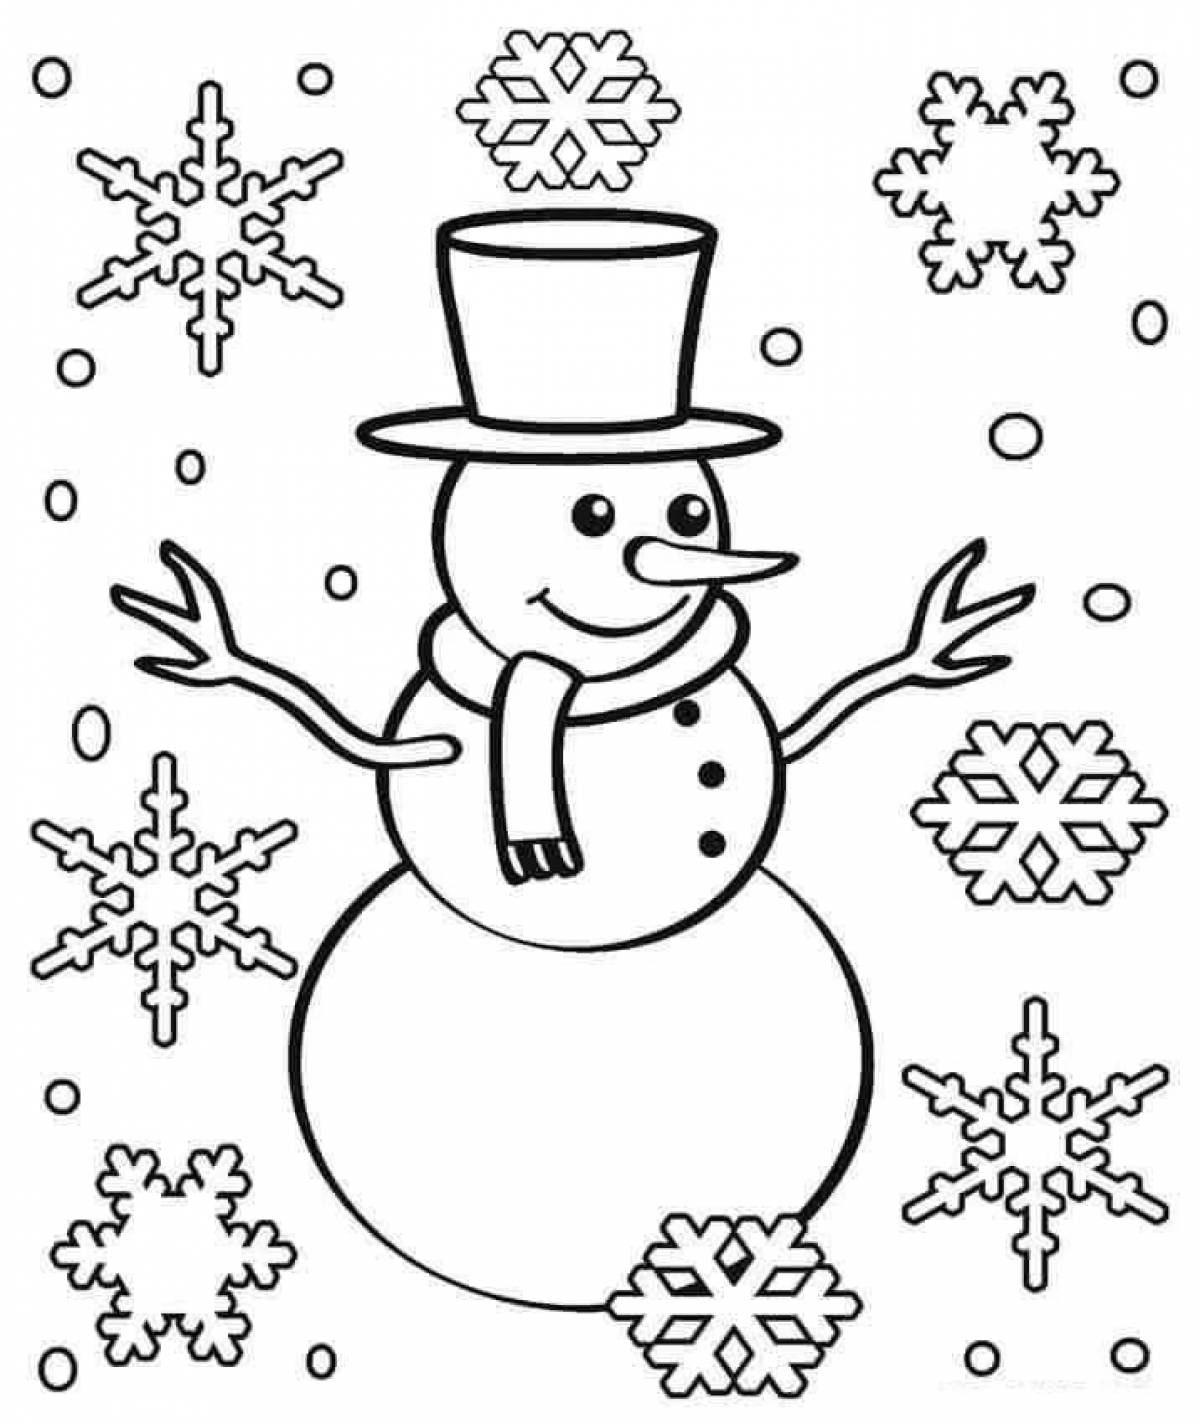 Humorous coloring book snowman for children 4-5 years old